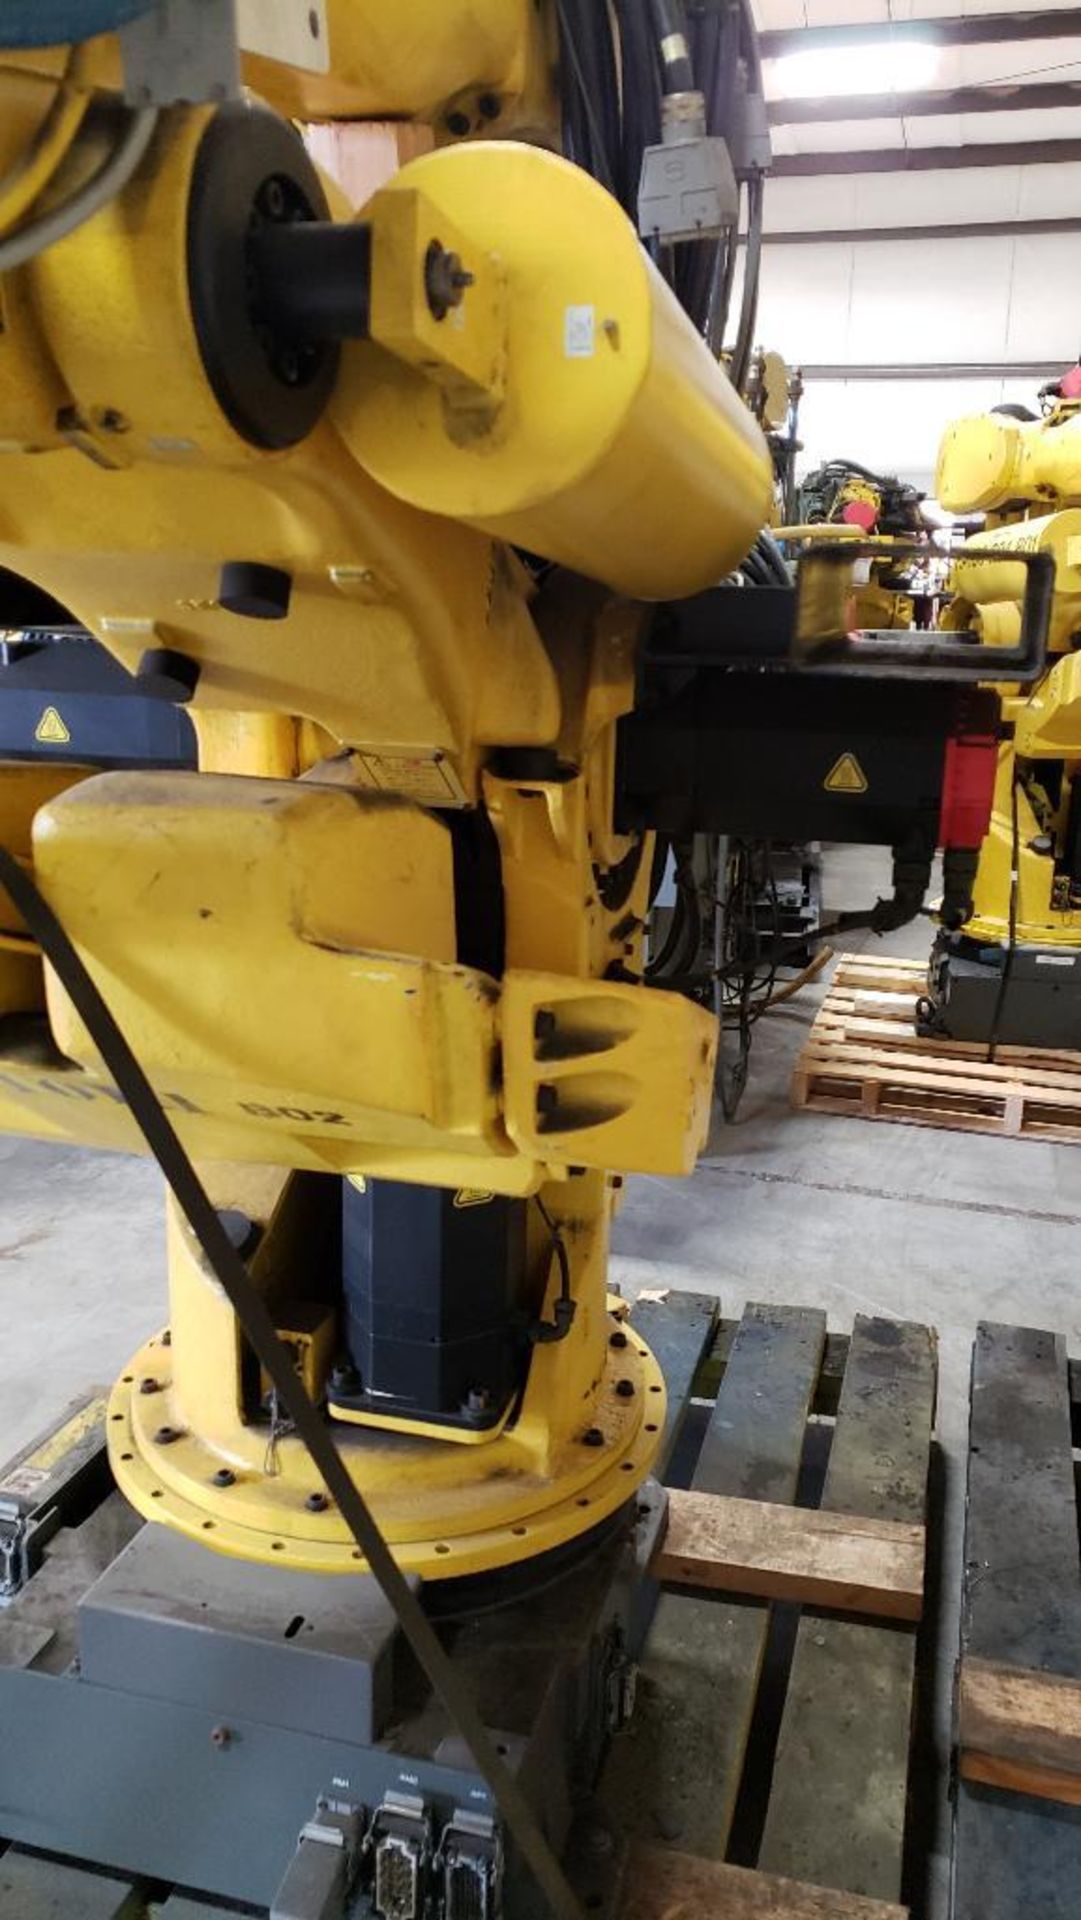 Fanuc S-420iW robot 6-axis arm. - Image 6 of 8